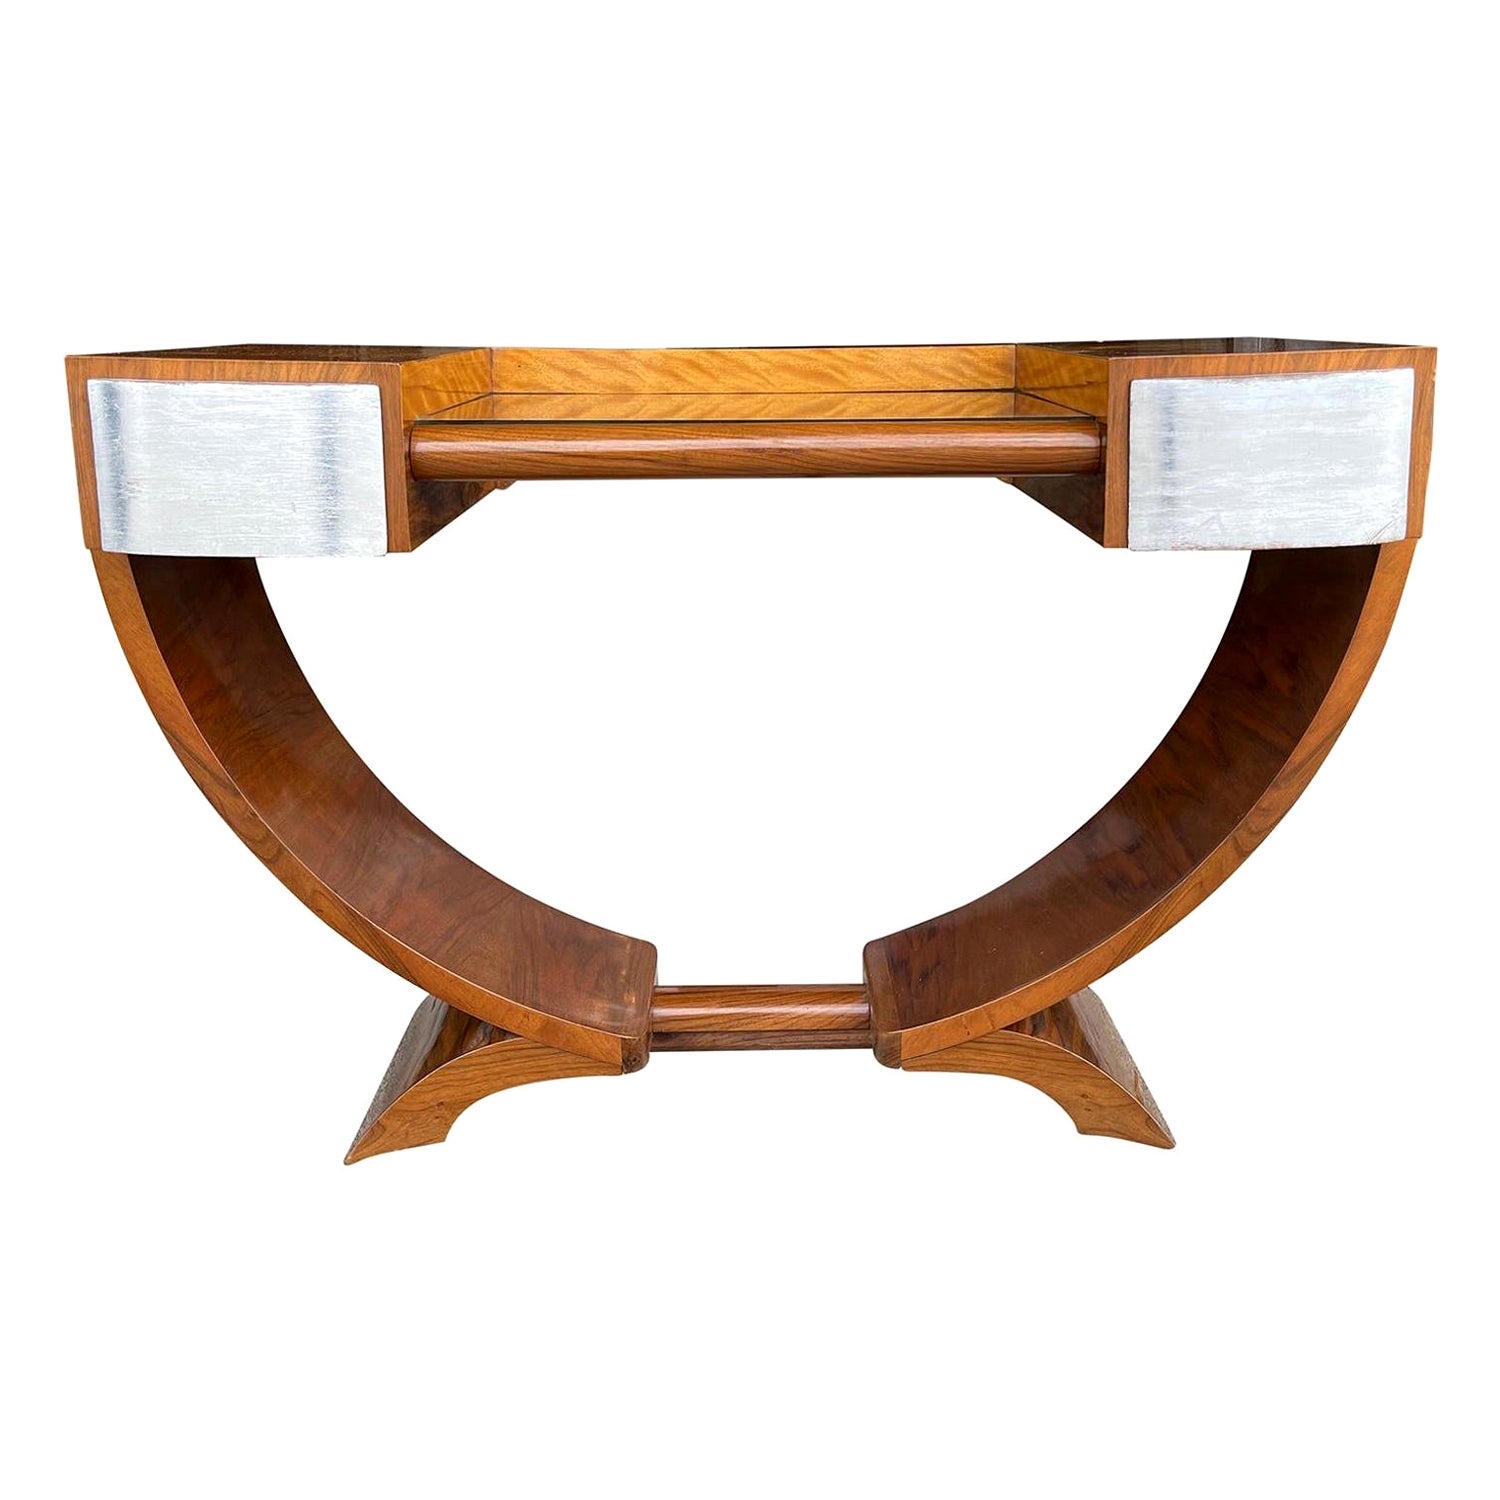 20th Century French Art Deco Walnut Coiffeuse Vanity by Émile-Jacques Ruhlmann For Sale